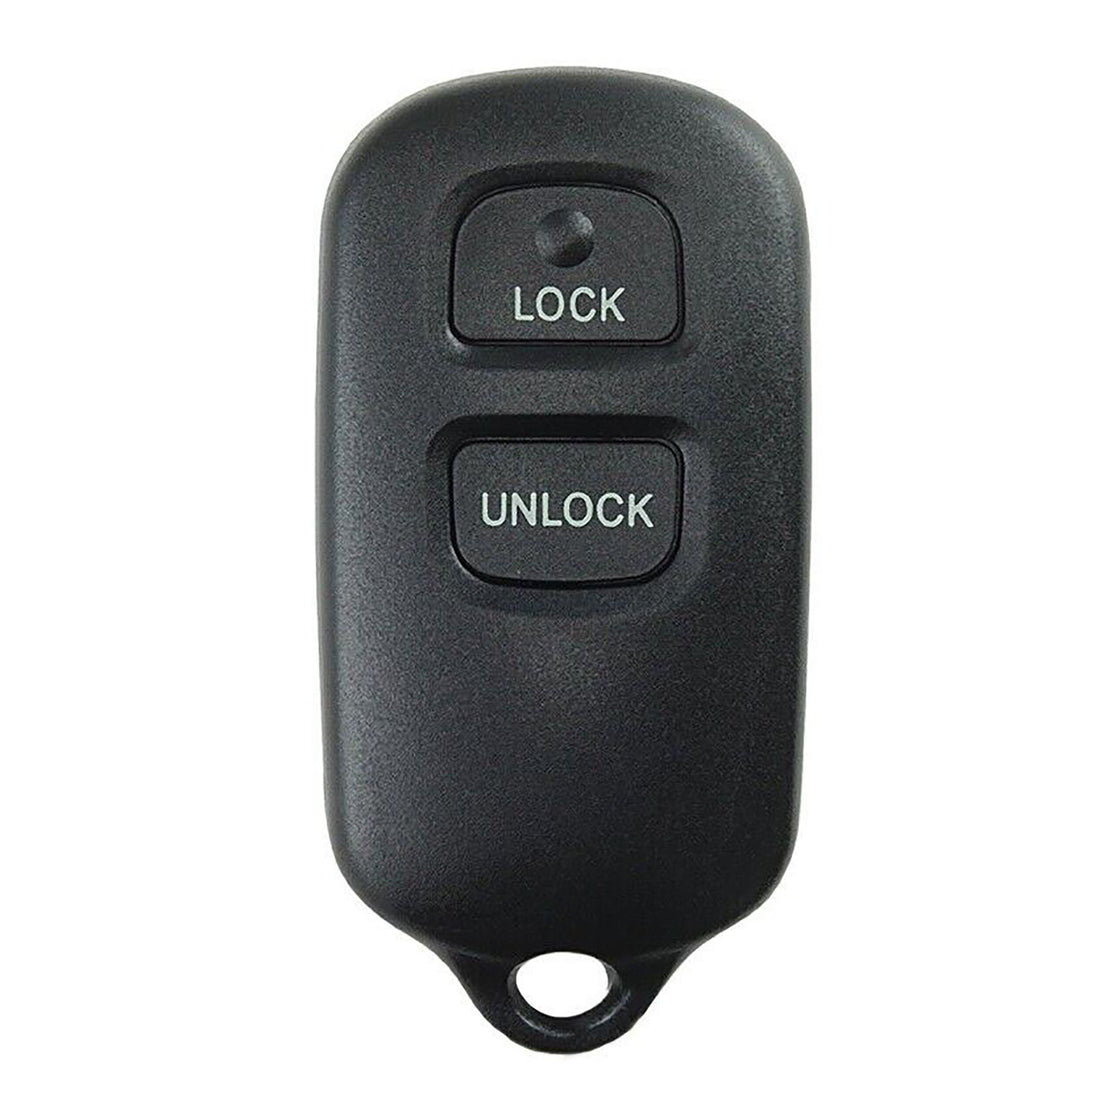 1x New Replacement Remote Compatible with & Fit For Toyota Scion Vehicles HYQ12BBX - MPN HYQ12BBX-02